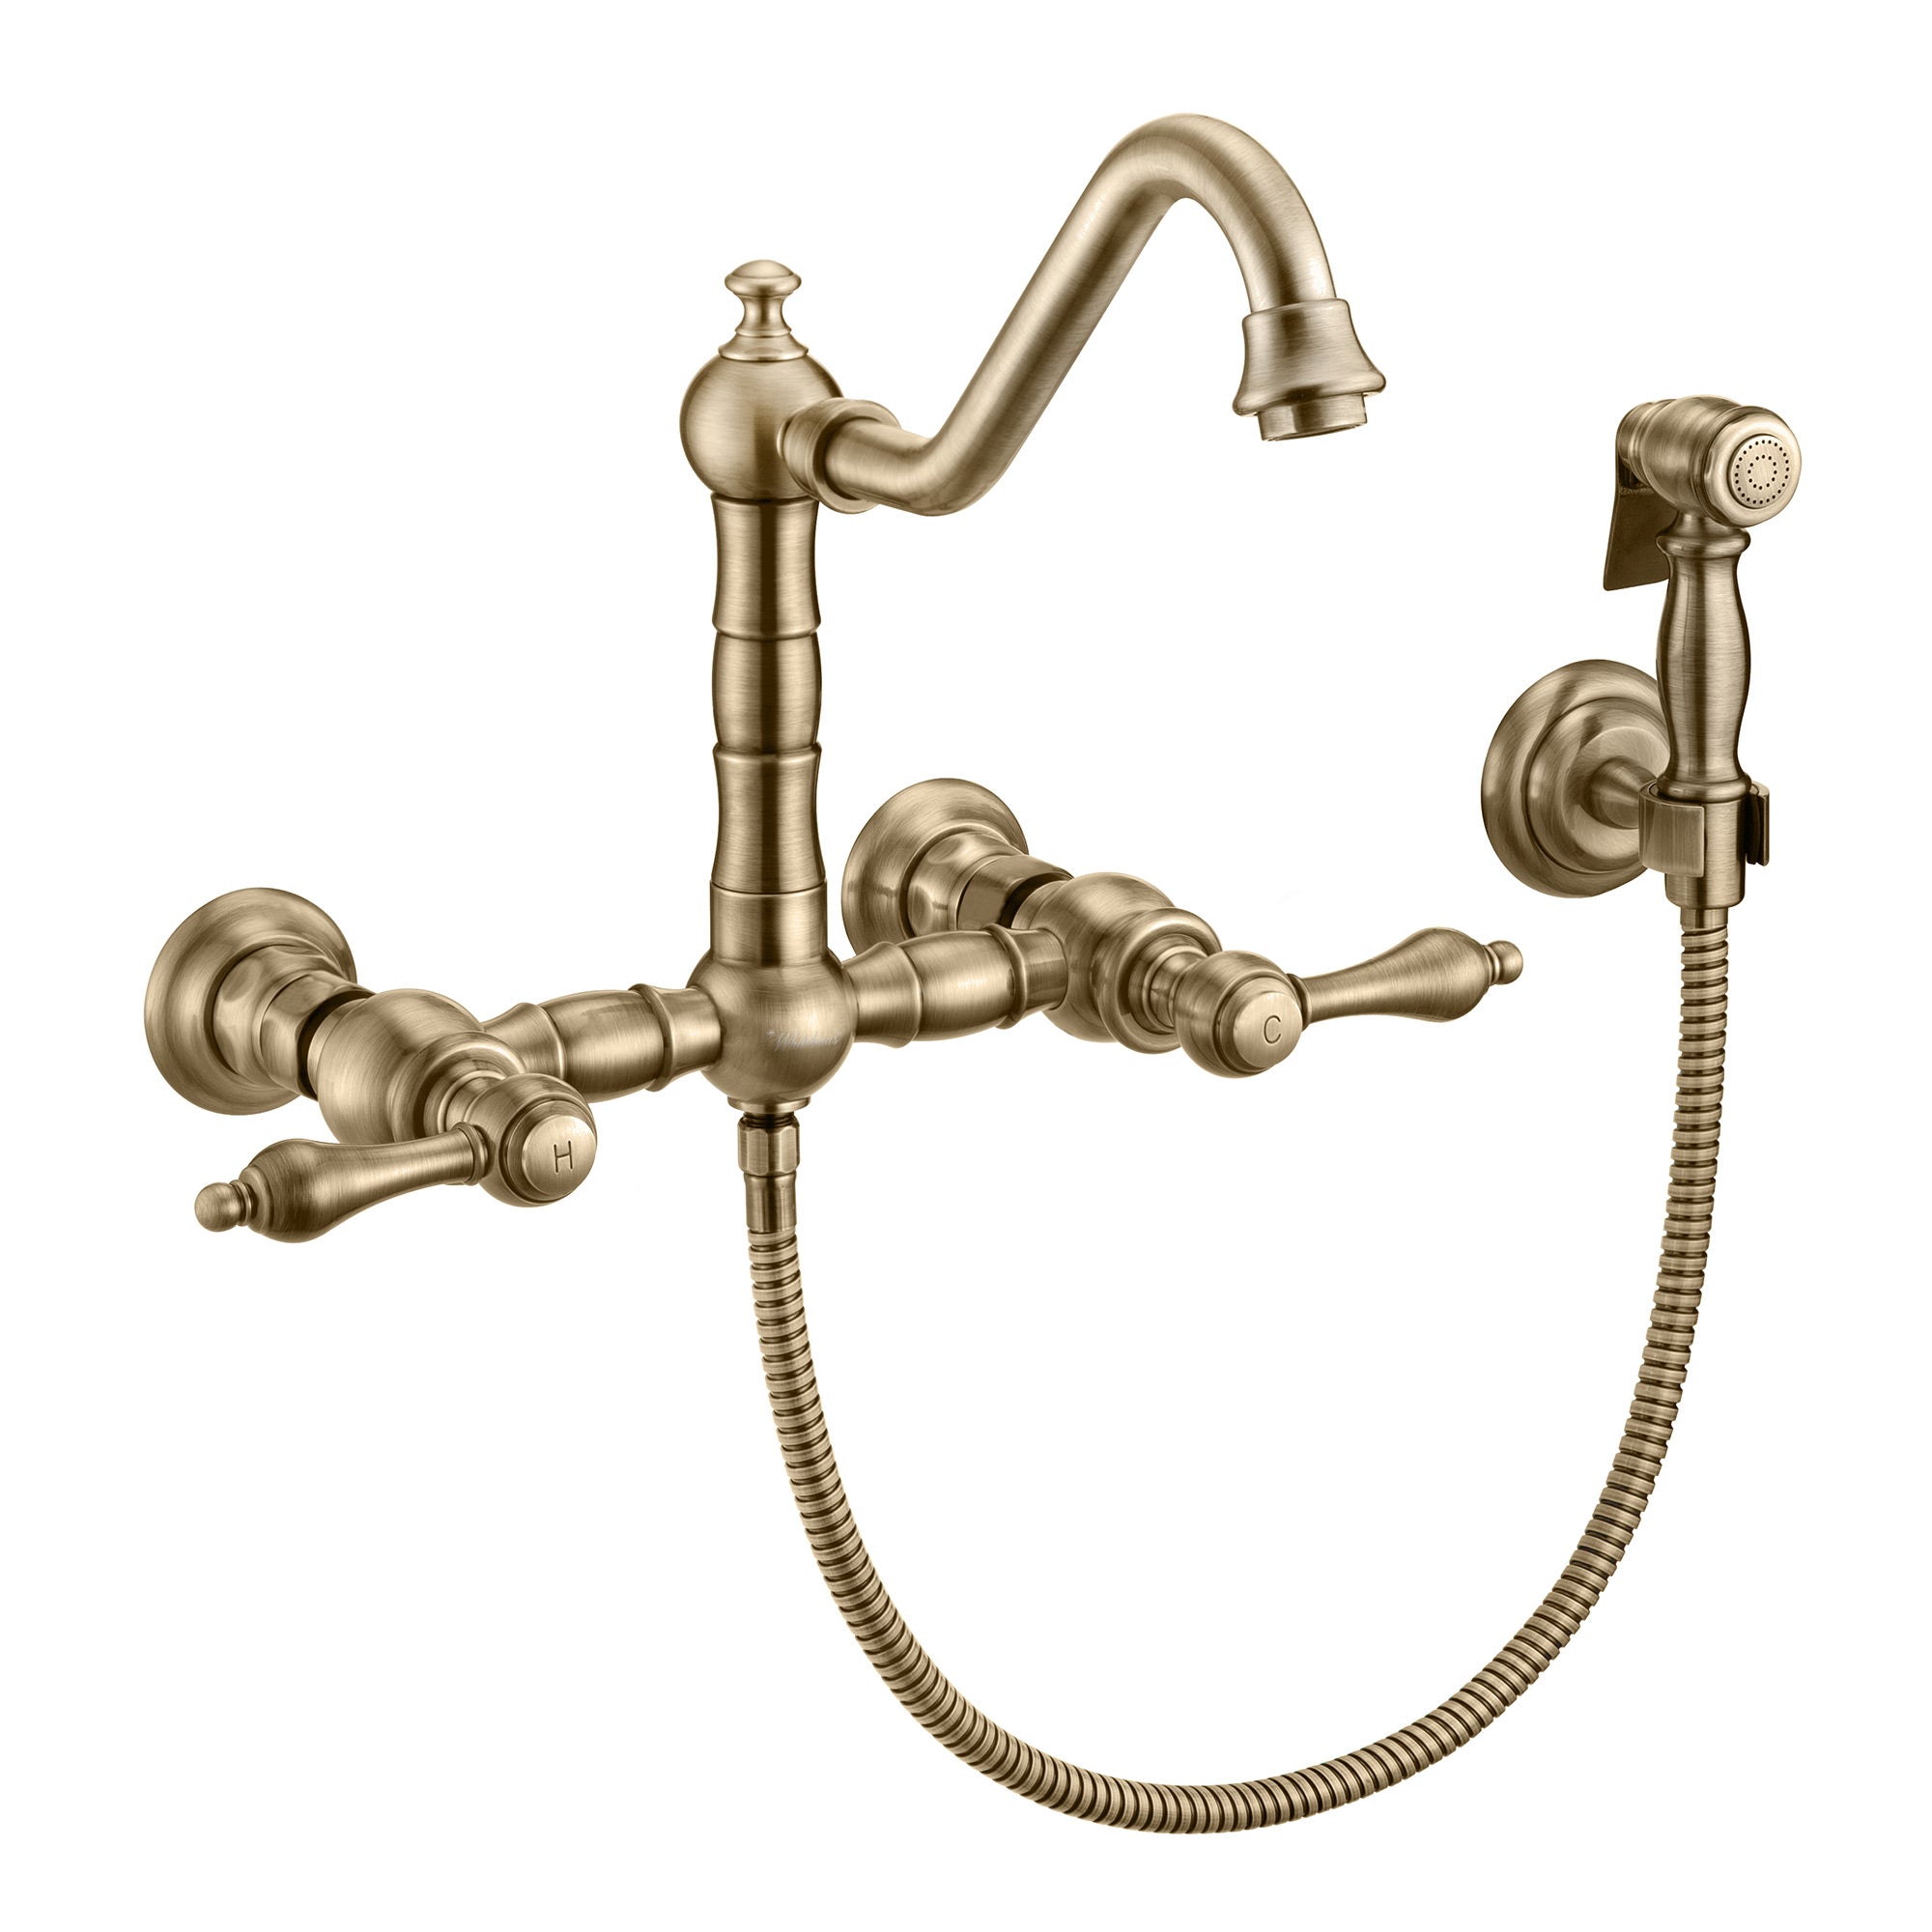 Vintage Iii Plus Wall Mount Faucet With